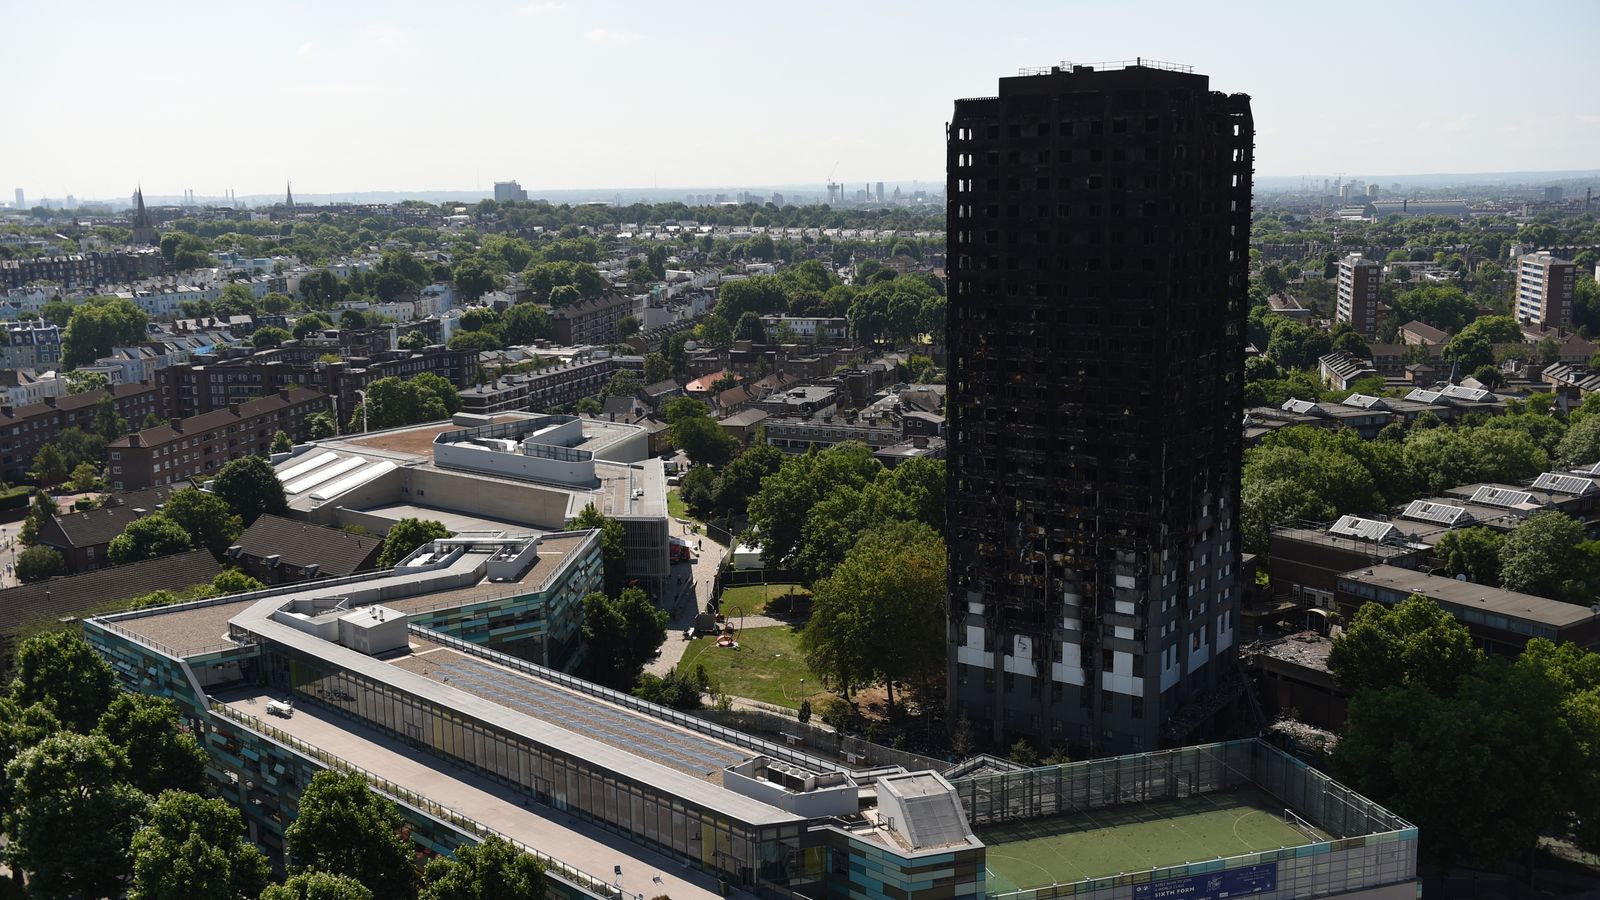 Cladding crisis latest: Nearly 10,000 people evicted due to safety concerns since Grenfell